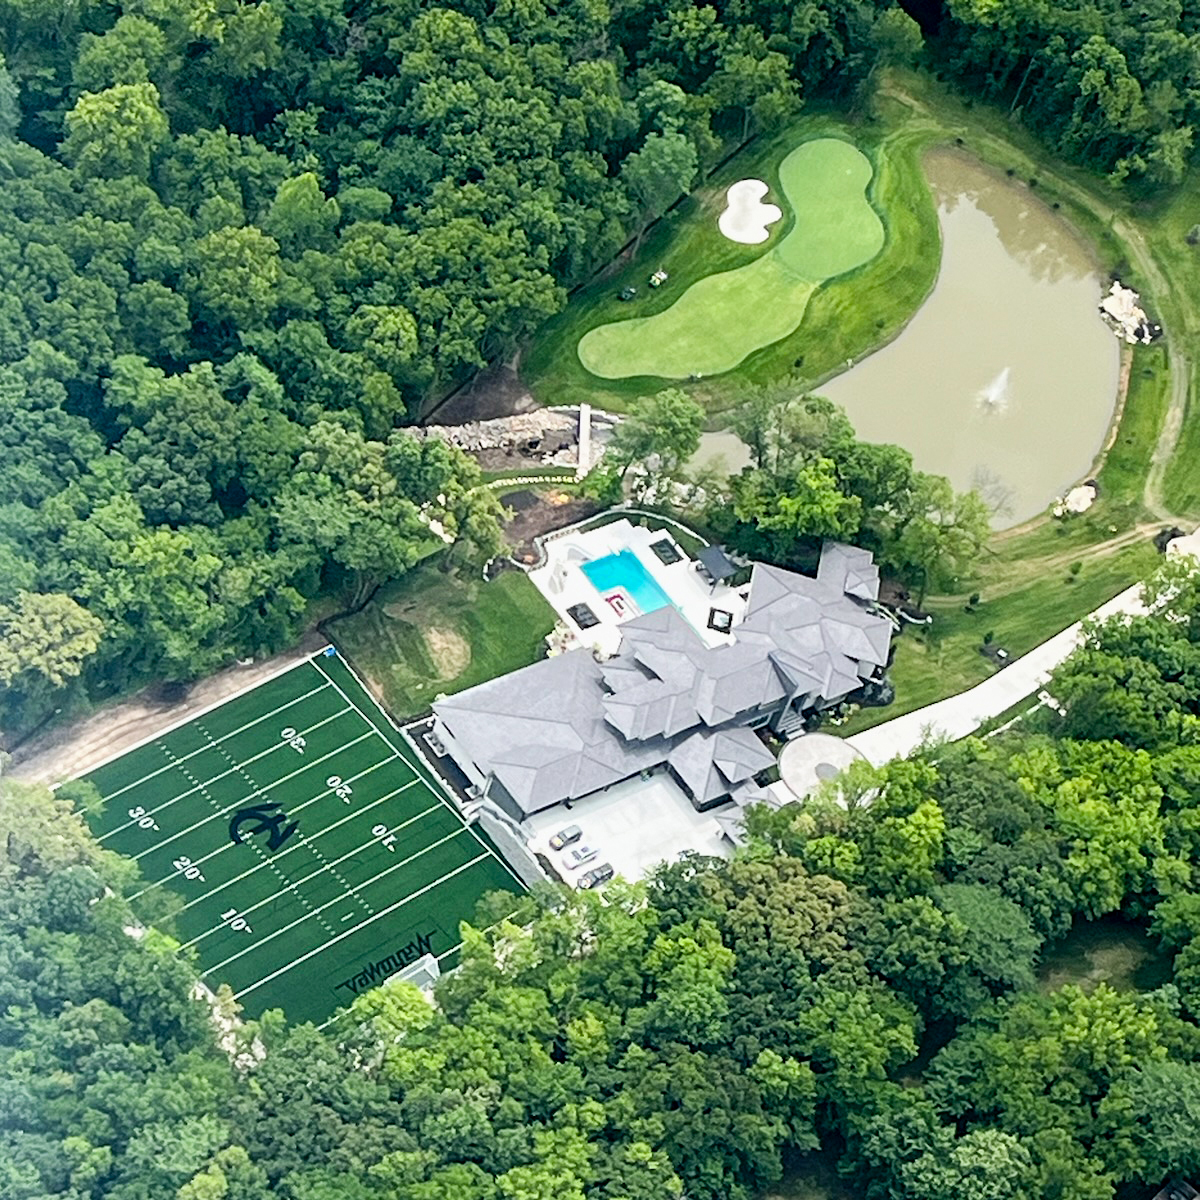 Patrick Mahomes completes construction of dream home with backyard